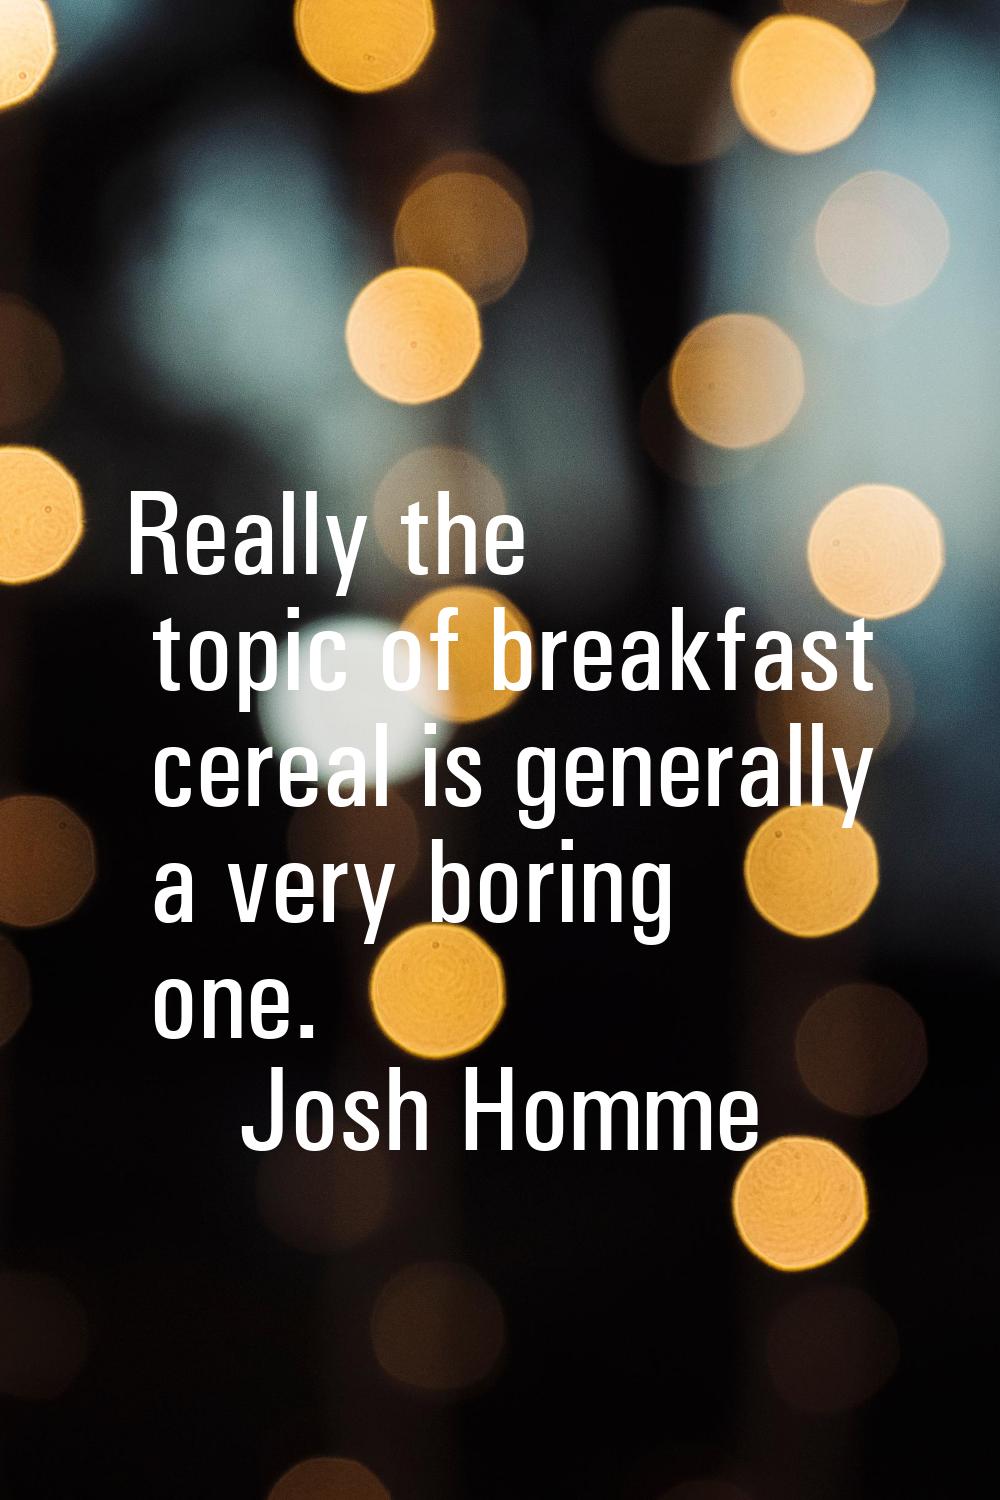 Really the topic of breakfast cereal is generally a very boring one.